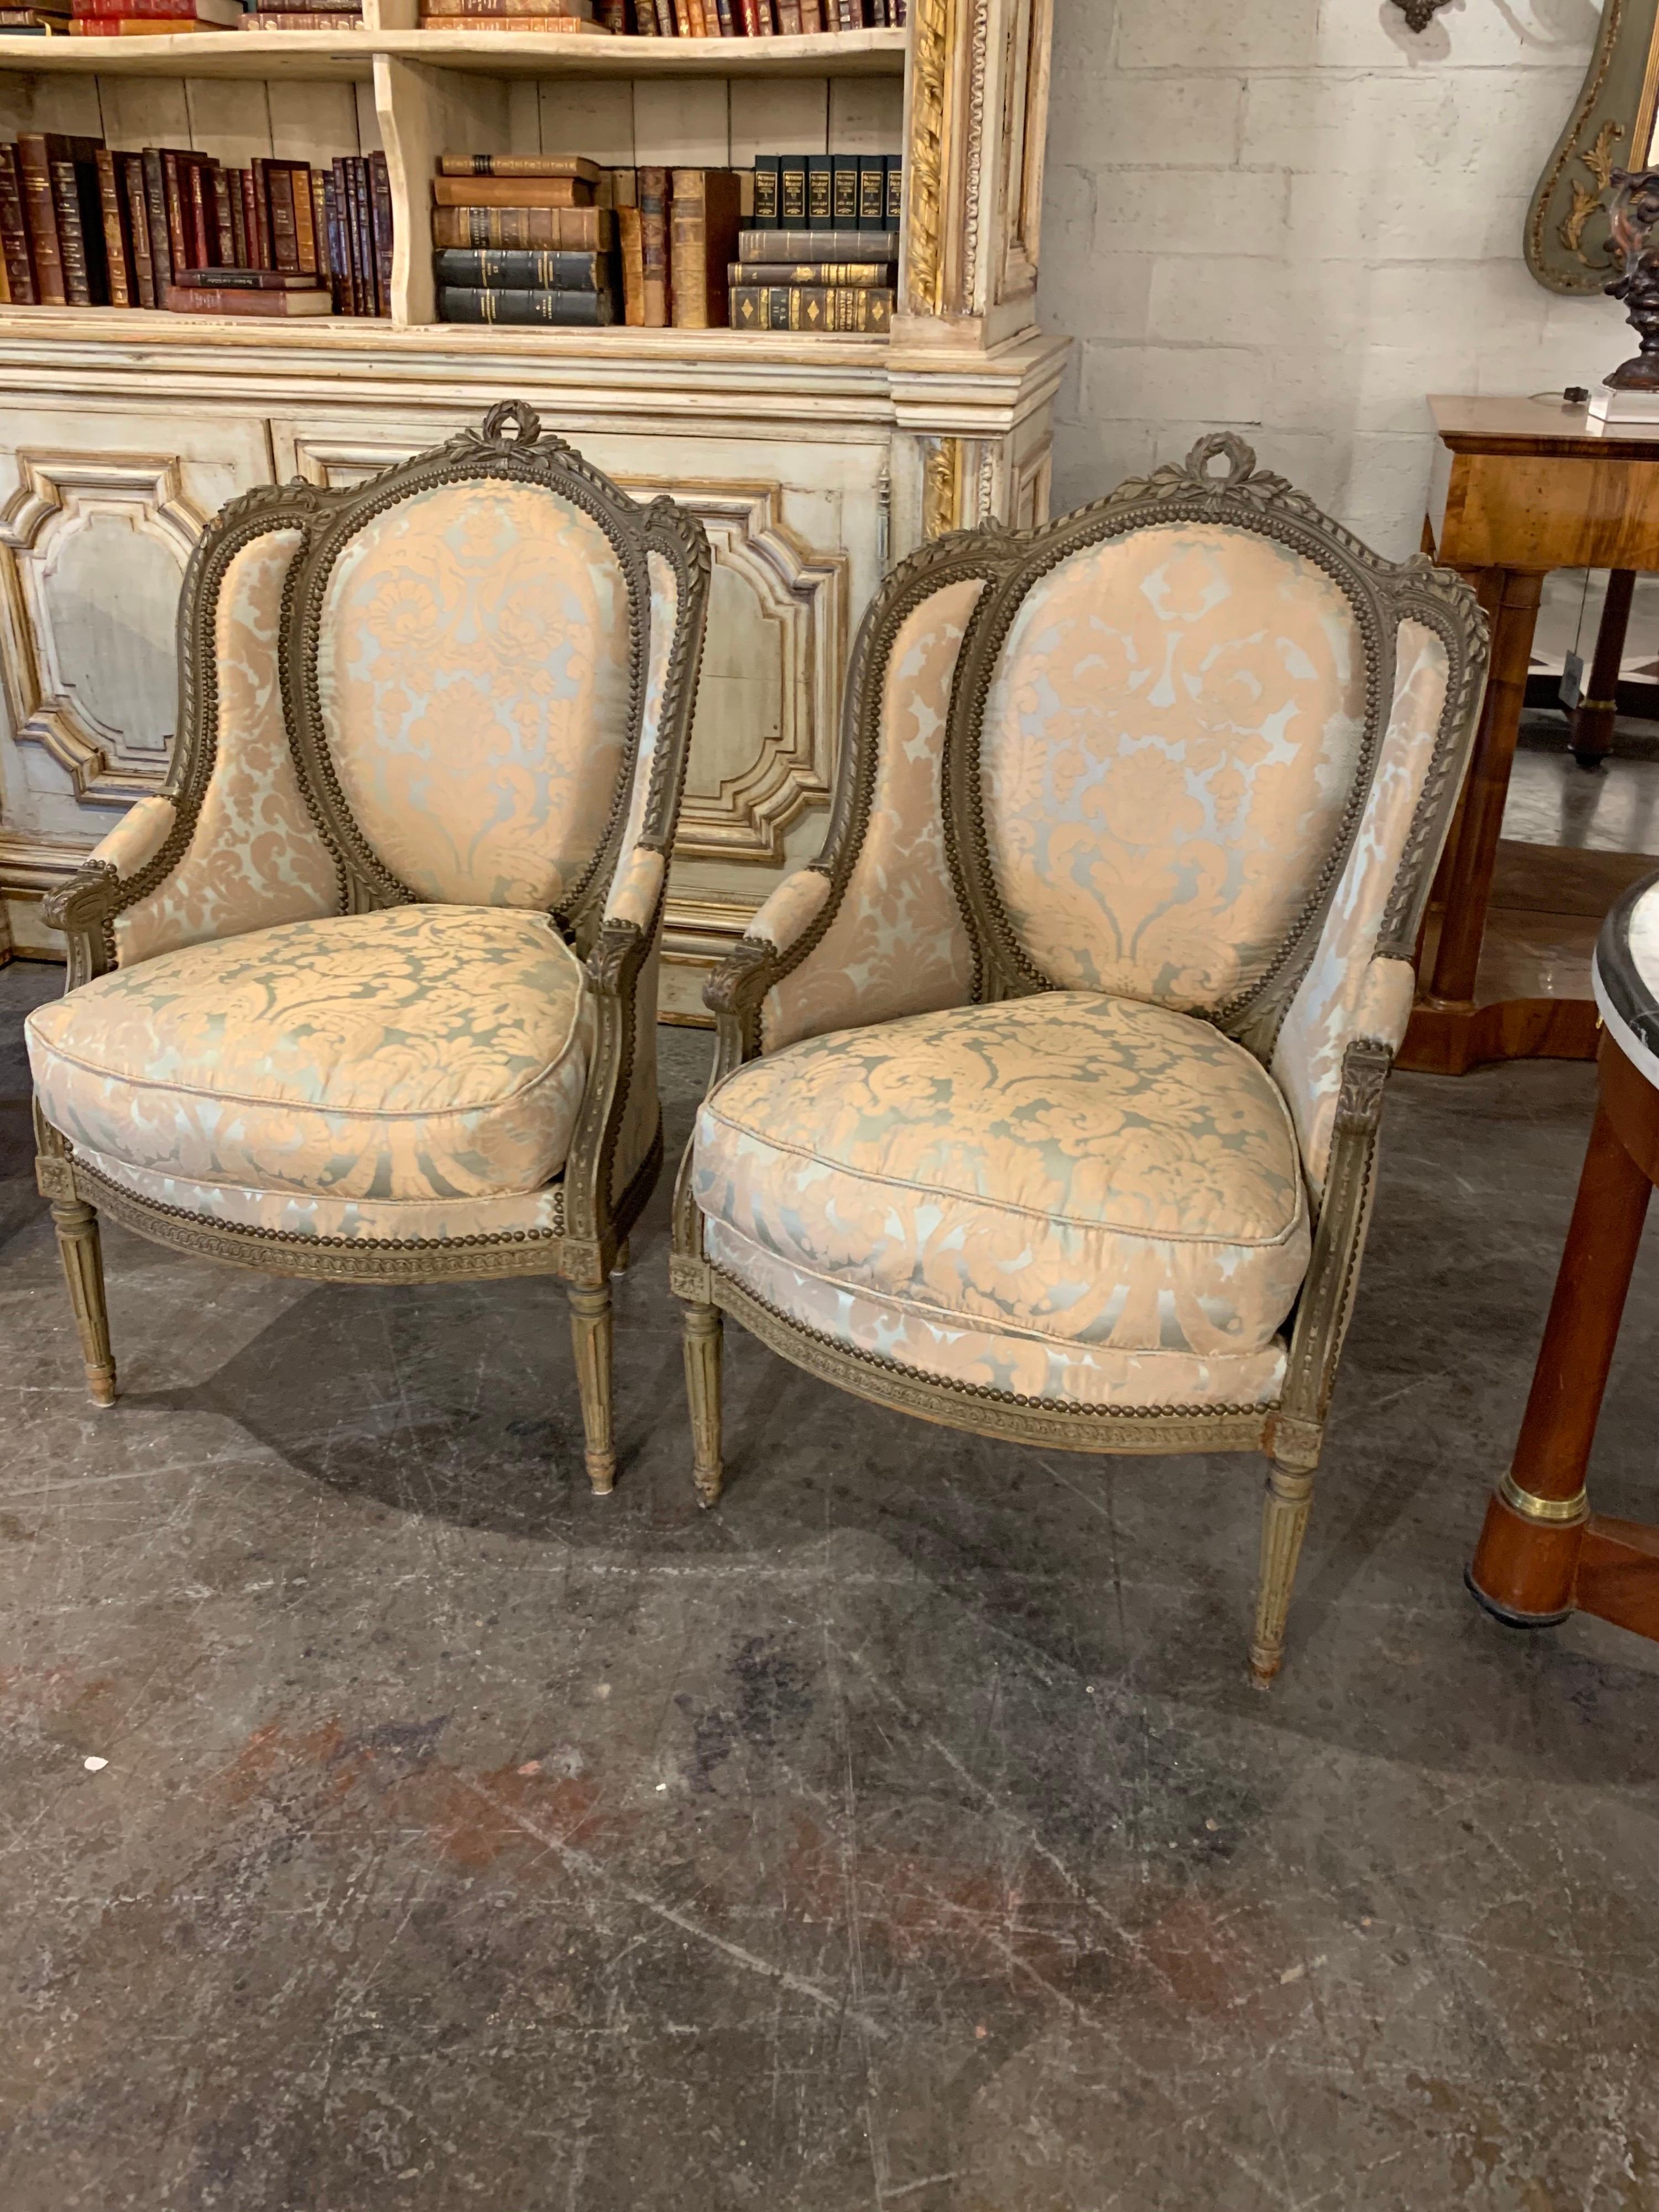 Exquisite pair of 19th century French Louis XVI style carved bergeres. Upholstered in a beautiful silk fabric and very Fine carvings on these! A true Classic! Note: Price listed is per item.